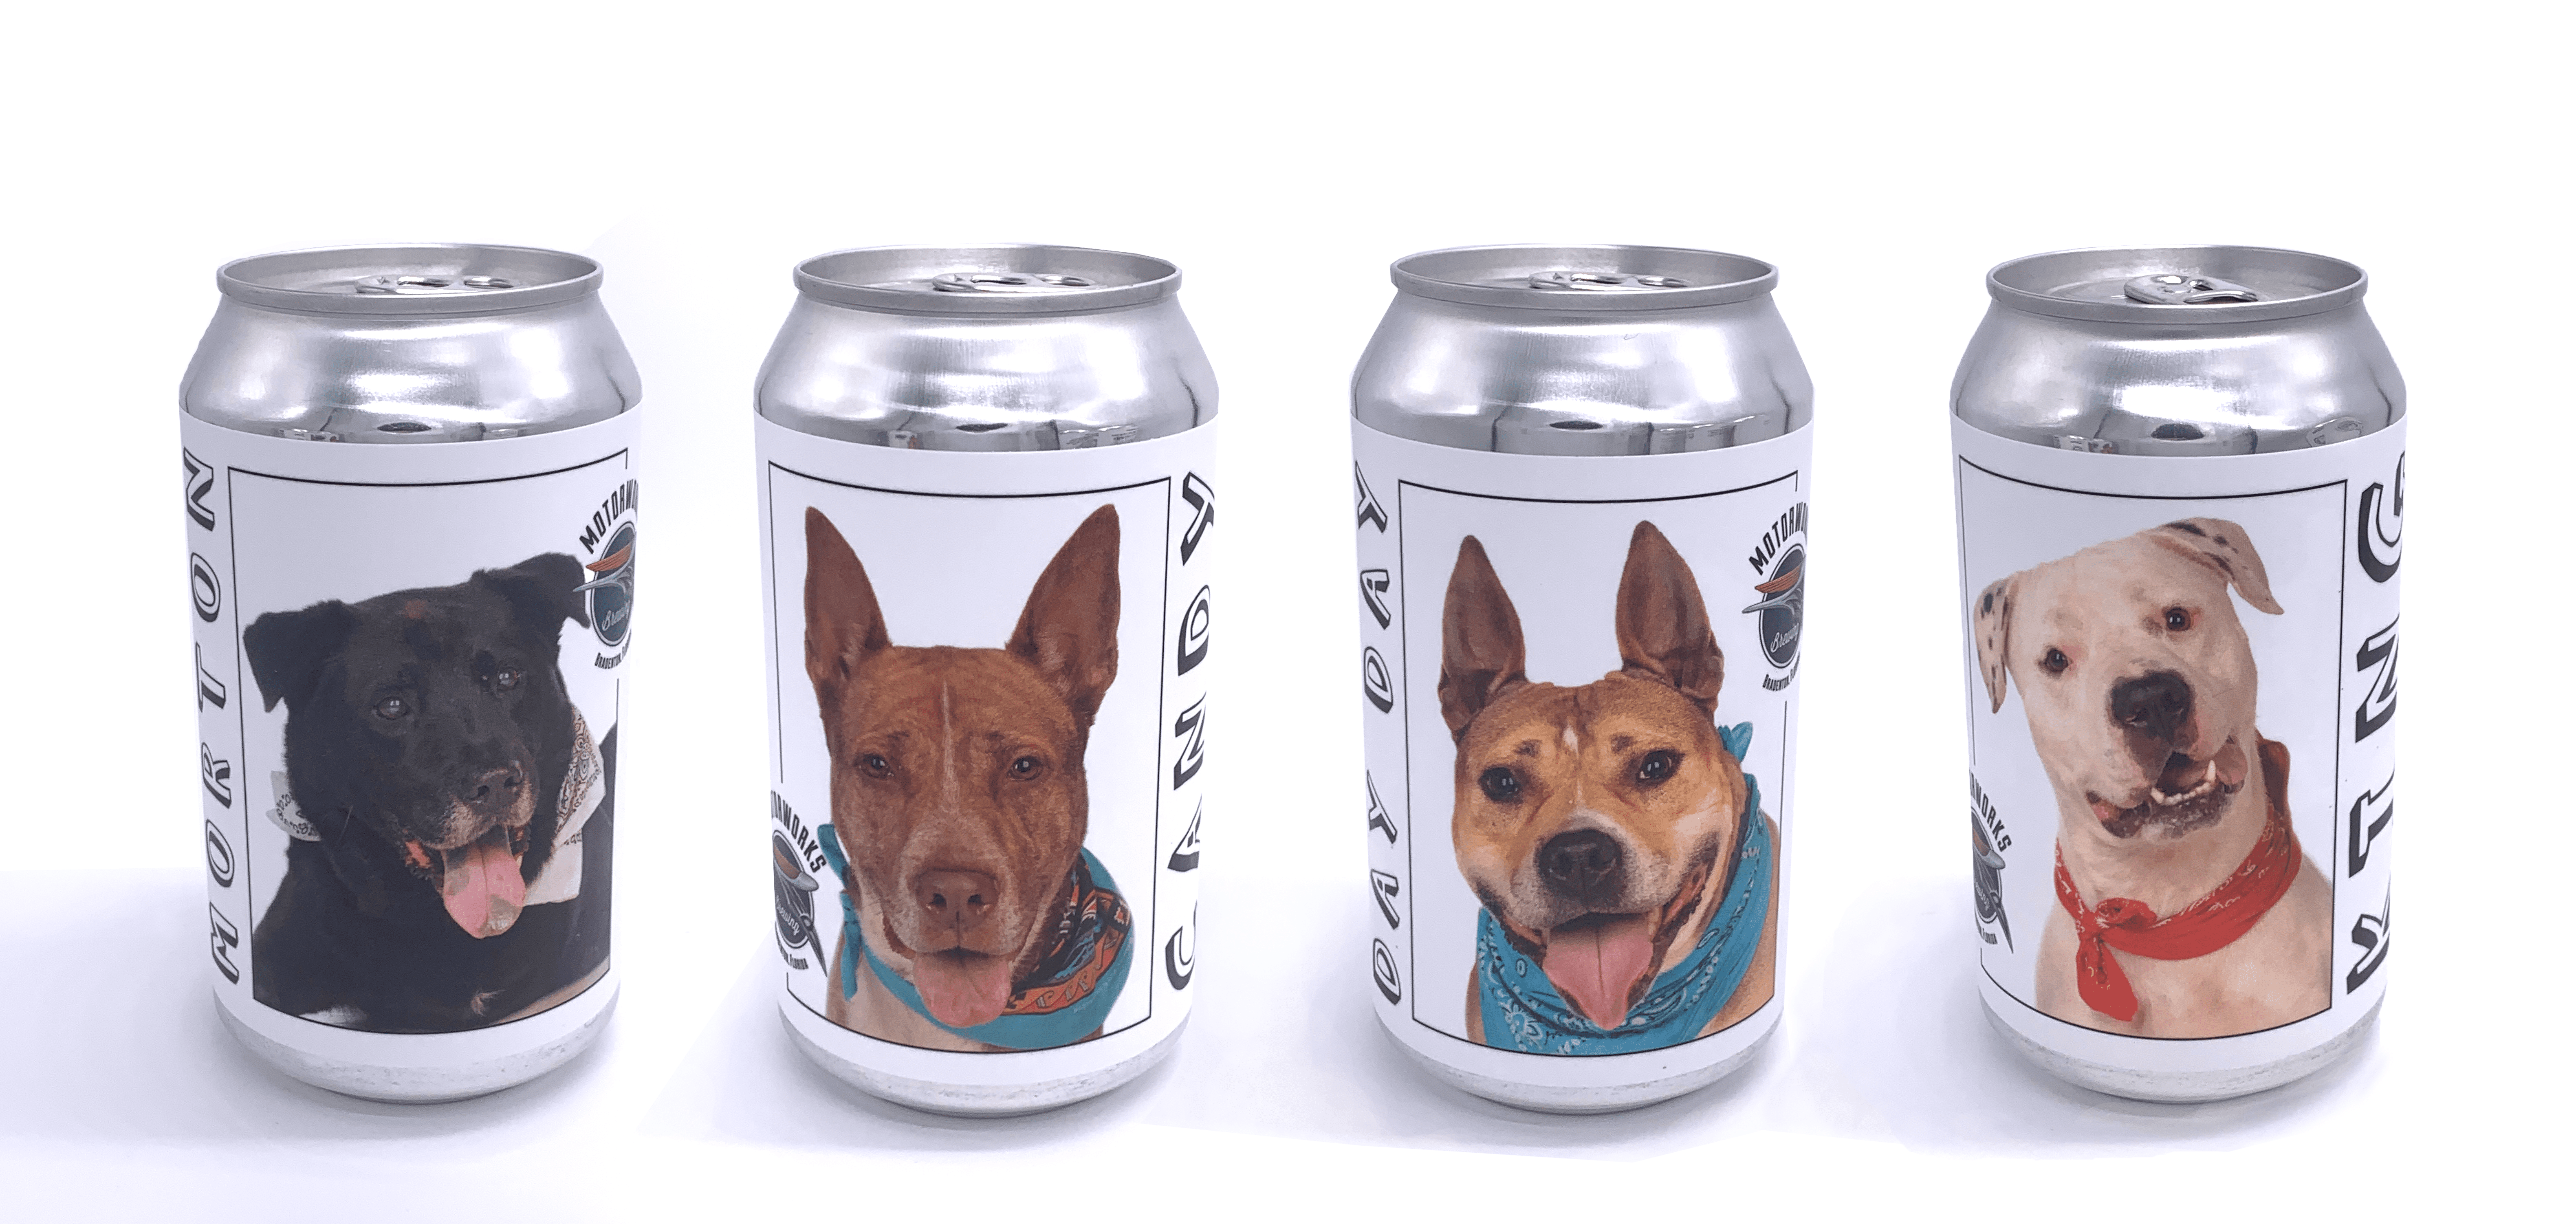 Motorworks Brewing Adoptable Cruiser cans with 4 adoptable shelter dogs on 4 different can labels